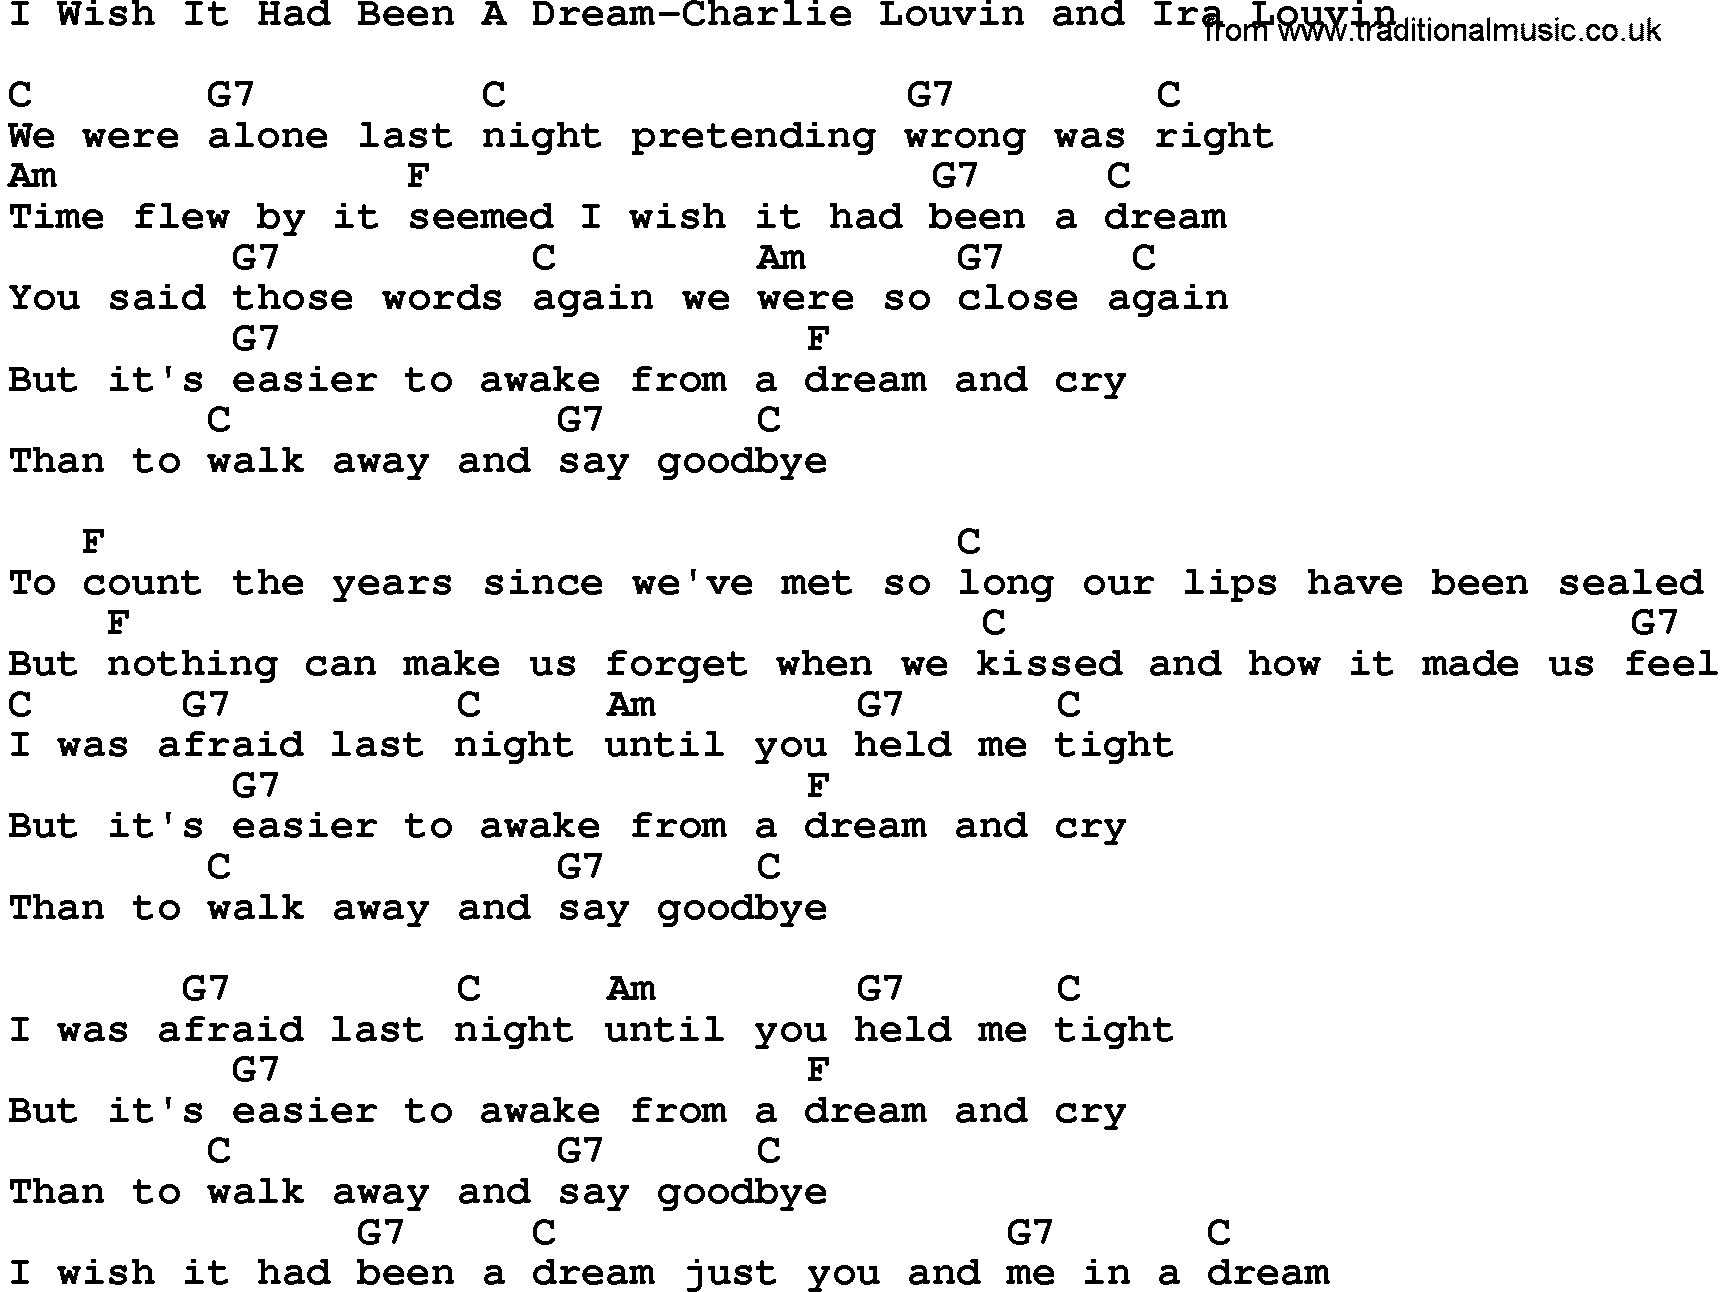 Country music song: I Wish It Had Been A Dream-Charlie Louvin And Ira Louvin lyrics and chords